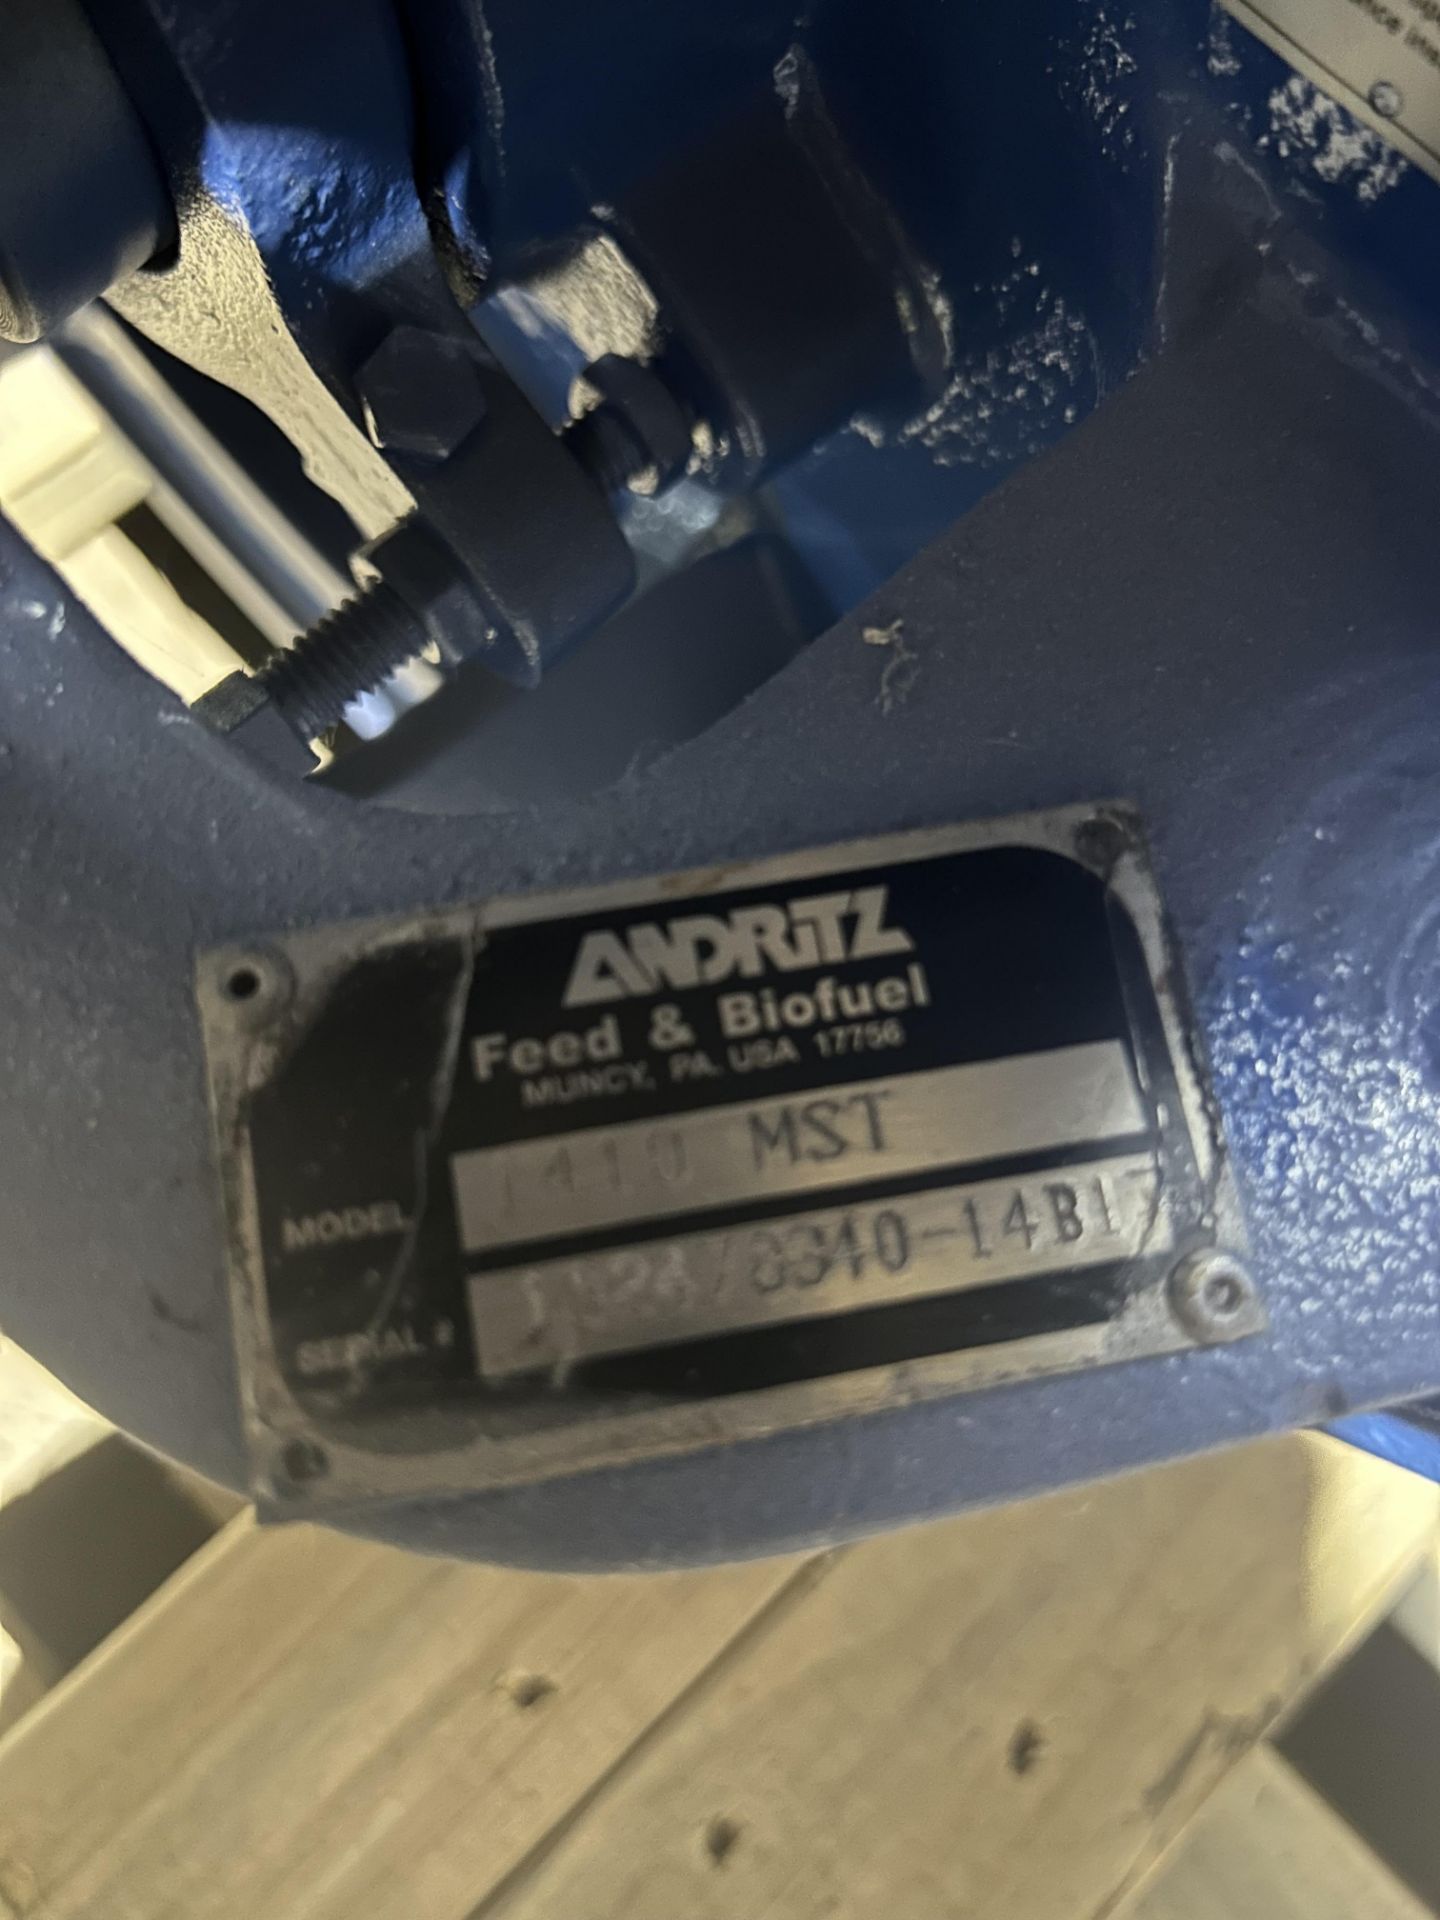 Andritz Rotary Valve , Rigging & Loading Fee: $100 - Image 2 of 7